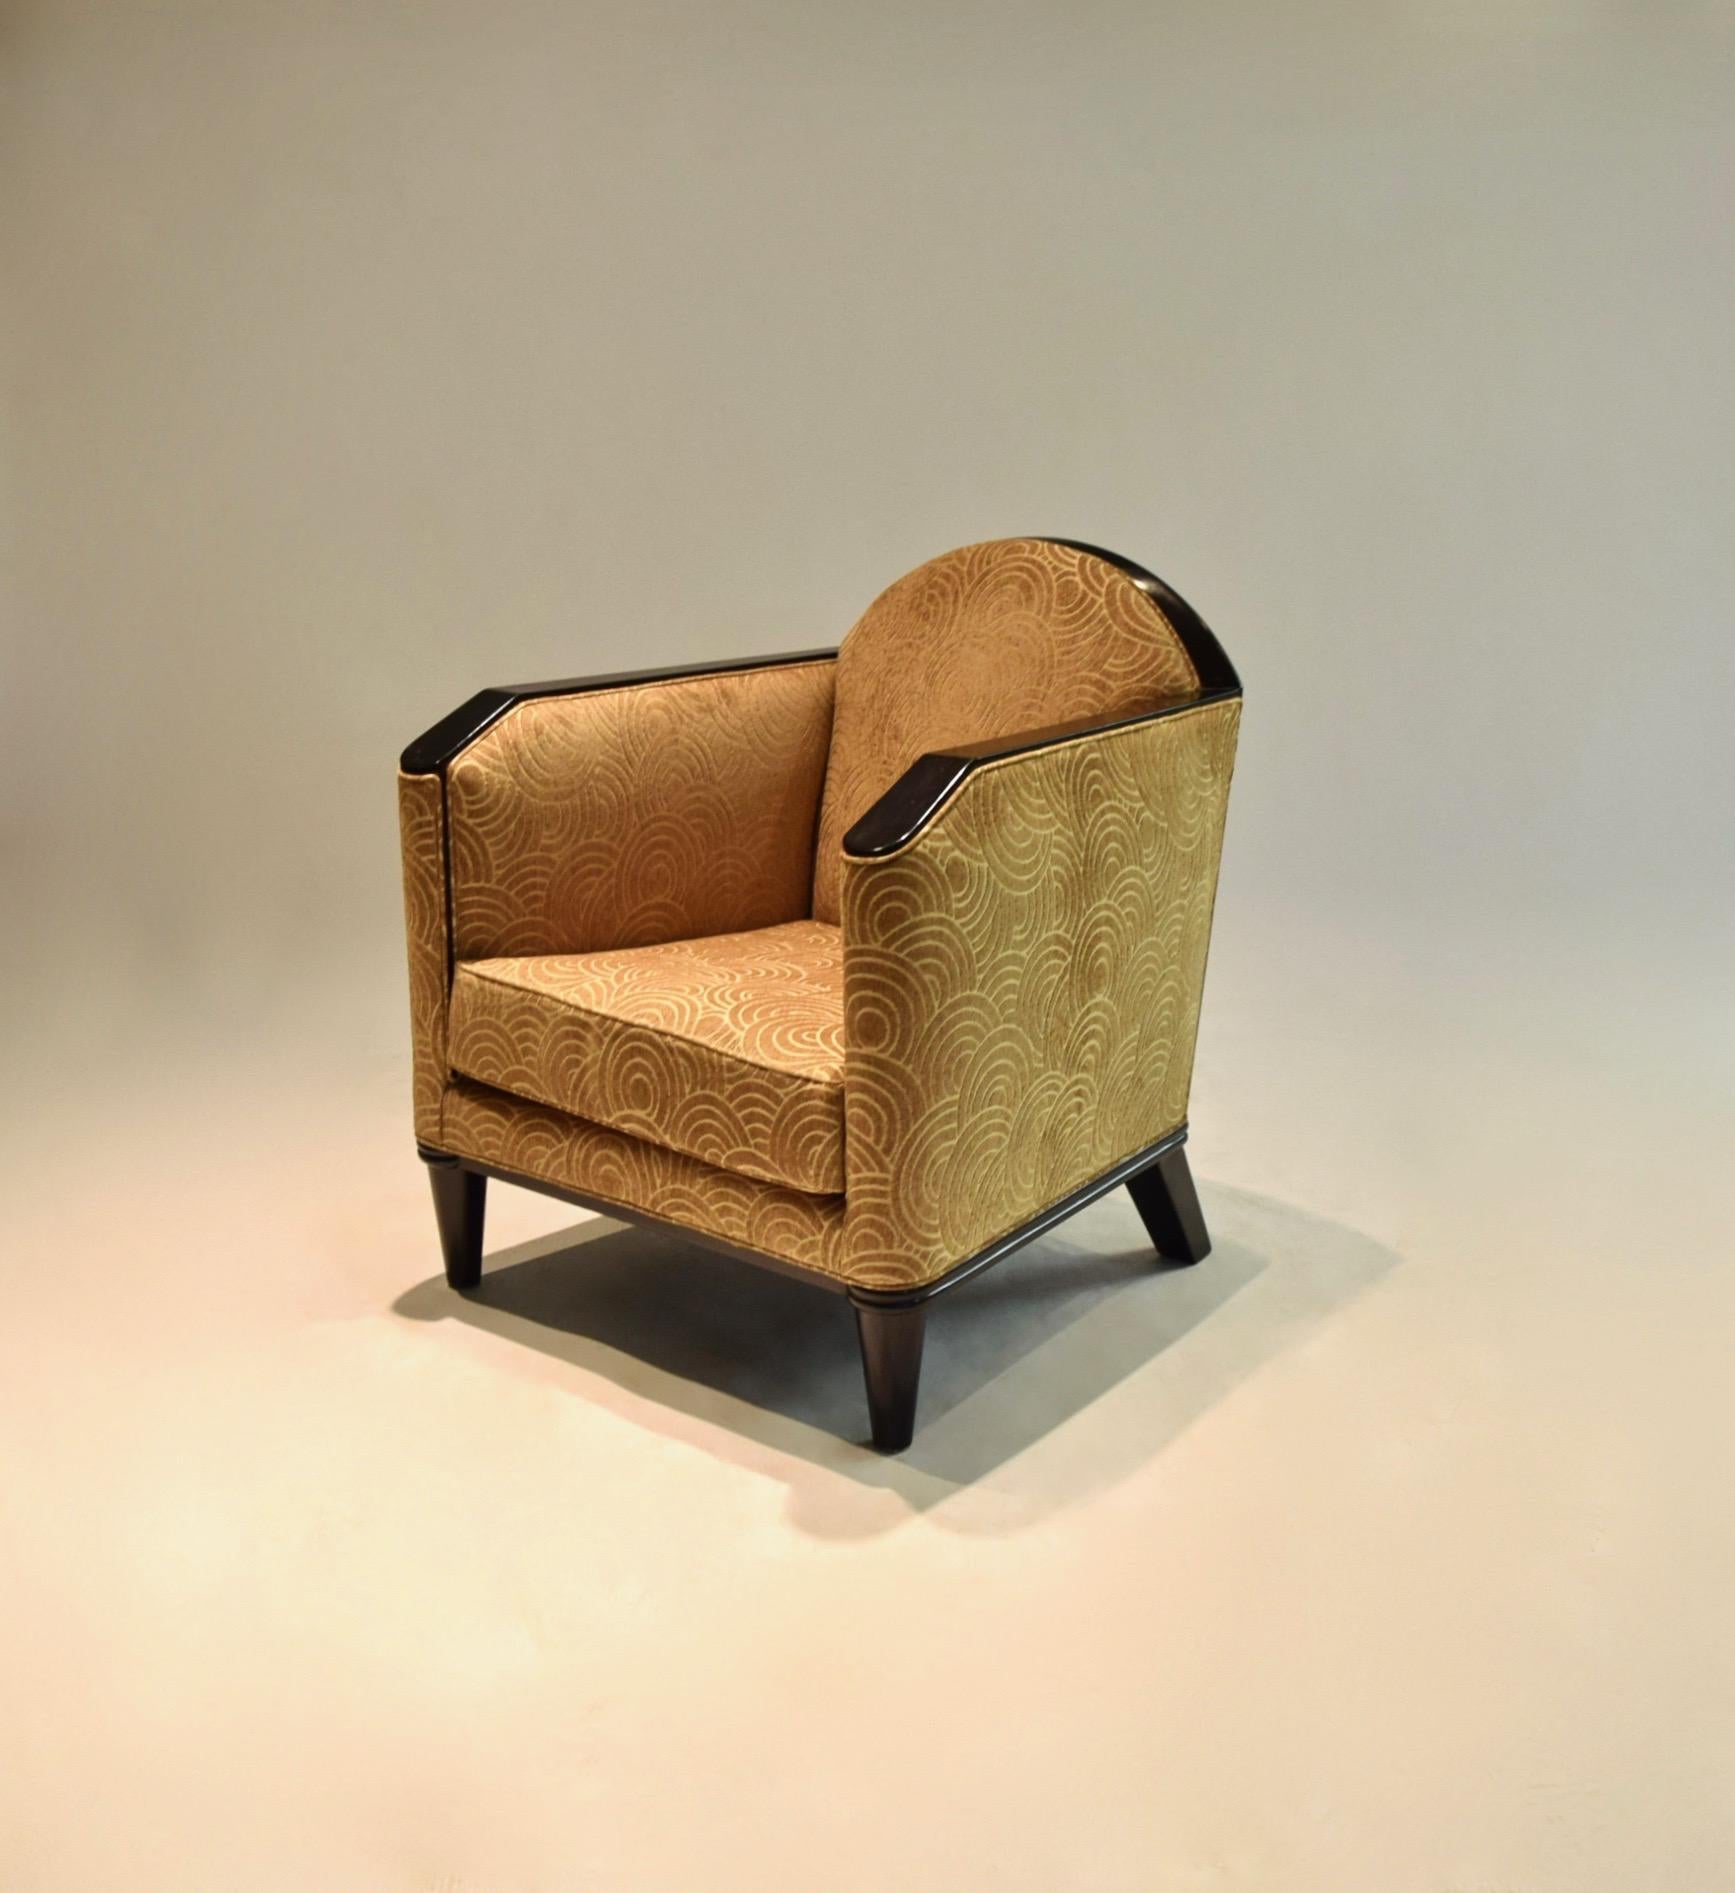 Deco Lounge Chair by Pierre Chareau, France, circa 1925 For Sale 2